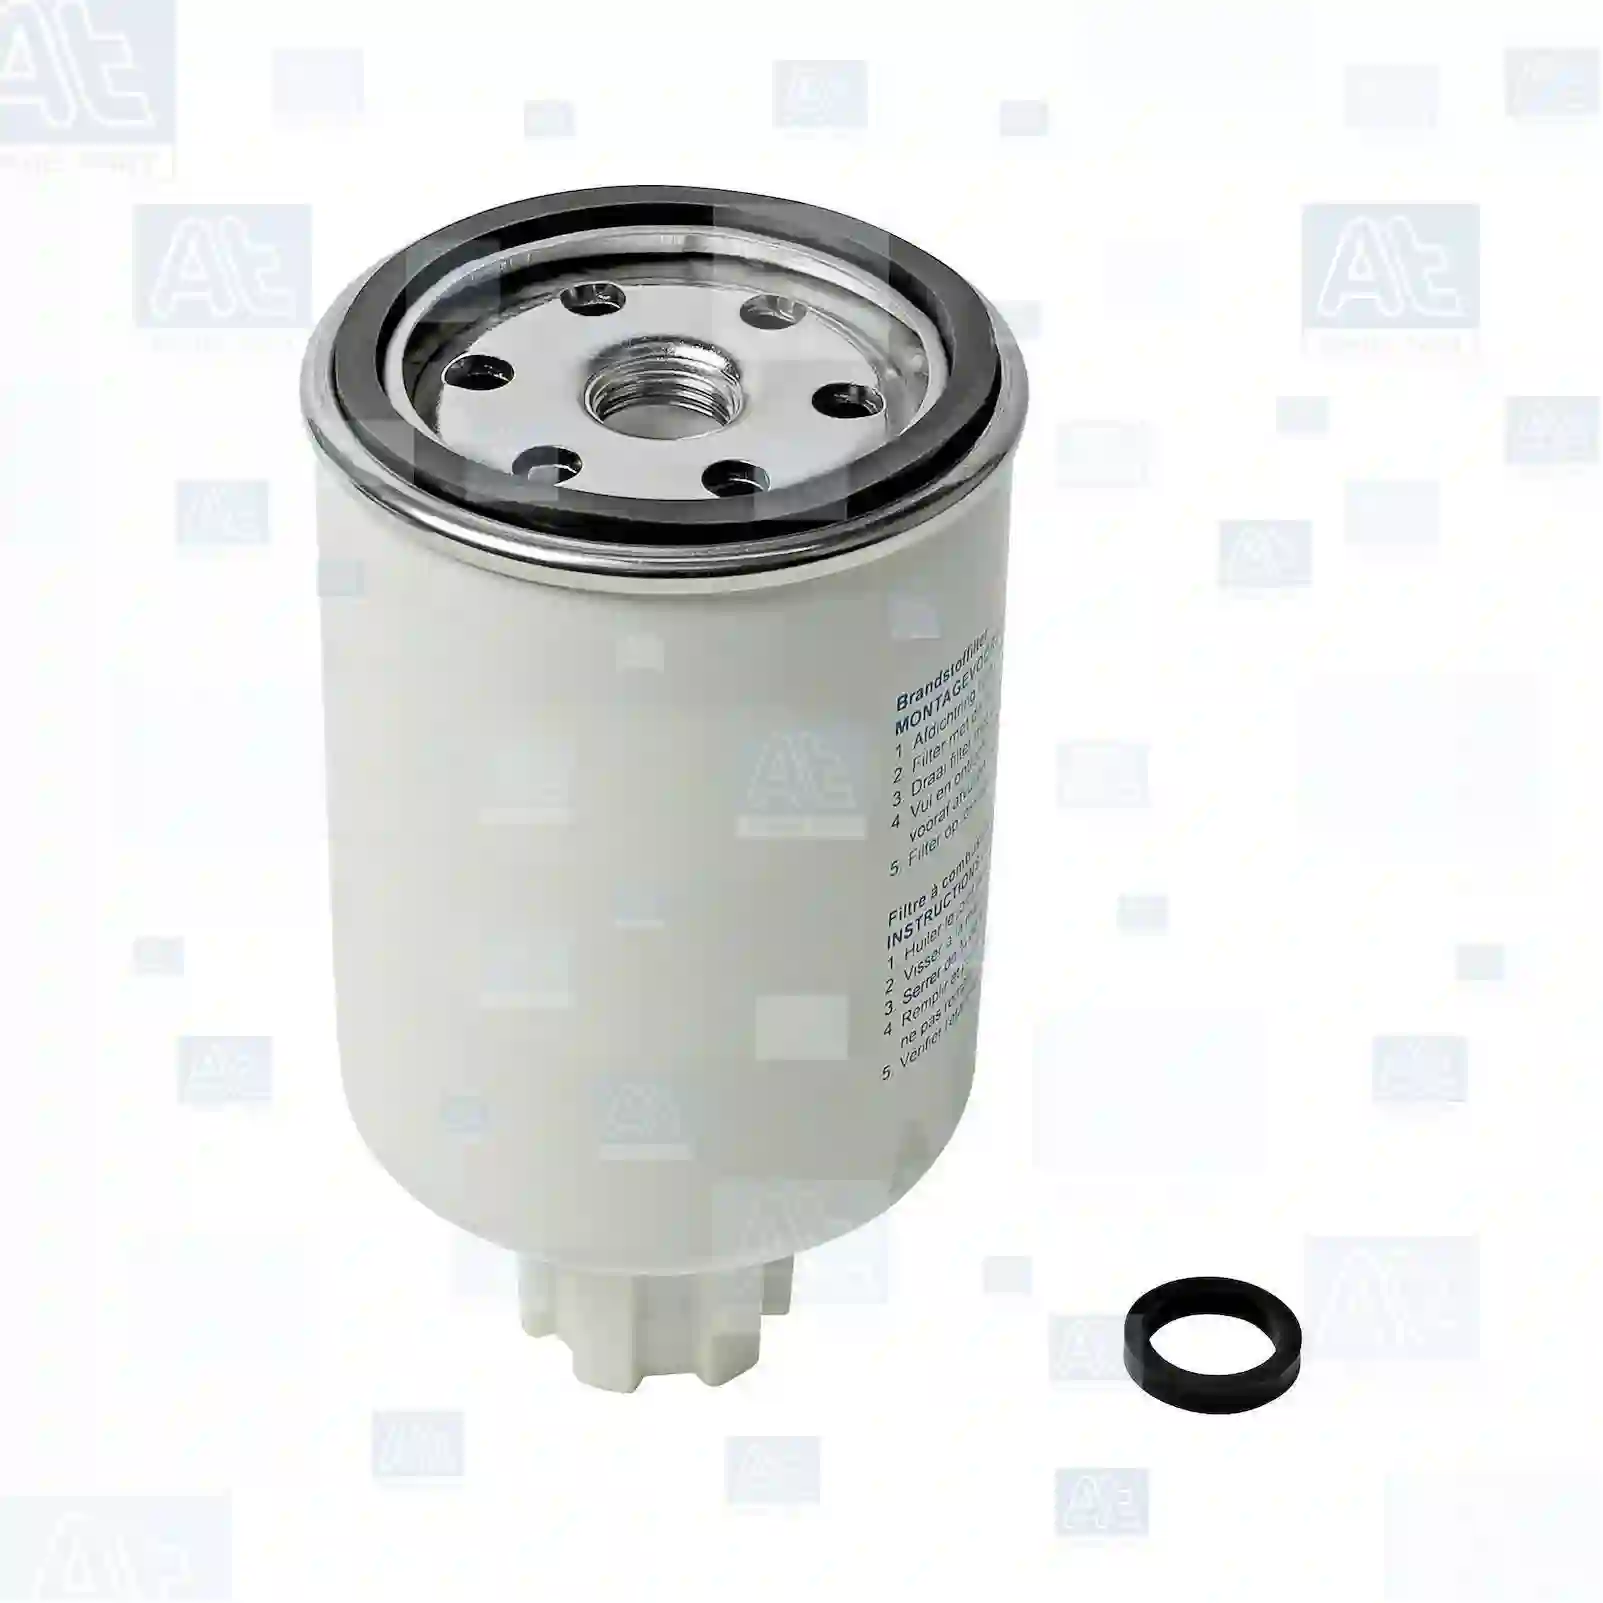 Fuel filter, at no 77723348, oem no: 72515734, A4027606, 813566, 90166585, 1133493R1, 114545A1, 133493, 71104220, 84229389, 86990957, J286503, J286503MP, J931063, J931962, 190626, 190661, 1906A8, 1004559, 1492827, 3286503, 3931062, 3931064, 490160, CBU1177, CBU1251, CBU1920, CVU1177, ZZ11063, 2011055, 01902138, 71736116, 73175965, 73175973, 3843760, 5018034, 5023923, DNP550248, 90166585, 90166858, 93891769, 25011999, 9414992533, 9437990108, 26561118, 01902138, 08122353, 1902138, 3903202, 51125030026, 0940000604, 3218794R91, 04785601, 71104220, 73175965, 84229389, 86990957, 190626, 190661, 1906A8, 90111090900, 5001850947, 83129993490, 15270824, 1257201, 3134055, 829993, ZG10129-0008 At Spare Part | Engine, Accelerator Pedal, Camshaft, Connecting Rod, Crankcase, Crankshaft, Cylinder Head, Engine Suspension Mountings, Exhaust Manifold, Exhaust Gas Recirculation, Filter Kits, Flywheel Housing, General Overhaul Kits, Engine, Intake Manifold, Oil Cleaner, Oil Cooler, Oil Filter, Oil Pump, Oil Sump, Piston & Liner, Sensor & Switch, Timing Case, Turbocharger, Cooling System, Belt Tensioner, Coolant Filter, Coolant Pipe, Corrosion Prevention Agent, Drive, Expansion Tank, Fan, Intercooler, Monitors & Gauges, Radiator, Thermostat, V-Belt / Timing belt, Water Pump, Fuel System, Electronical Injector Unit, Feed Pump, Fuel Filter, cpl., Fuel Gauge Sender,  Fuel Line, Fuel Pump, Fuel Tank, Injection Line Kit, Injection Pump, Exhaust System, Clutch & Pedal, Gearbox, Propeller Shaft, Axles, Brake System, Hubs & Wheels, Suspension, Leaf Spring, Universal Parts / Accessories, Steering, Electrical System, Cabin Fuel filter, at no 77723348, oem no: 72515734, A4027606, 813566, 90166585, 1133493R1, 114545A1, 133493, 71104220, 84229389, 86990957, J286503, J286503MP, J931063, J931962, 190626, 190661, 1906A8, 1004559, 1492827, 3286503, 3931062, 3931064, 490160, CBU1177, CBU1251, CBU1920, CVU1177, ZZ11063, 2011055, 01902138, 71736116, 73175965, 73175973, 3843760, 5018034, 5023923, DNP550248, 90166585, 90166858, 93891769, 25011999, 9414992533, 9437990108, 26561118, 01902138, 08122353, 1902138, 3903202, 51125030026, 0940000604, 3218794R91, 04785601, 71104220, 73175965, 84229389, 86990957, 190626, 190661, 1906A8, 90111090900, 5001850947, 83129993490, 15270824, 1257201, 3134055, 829993, ZG10129-0008 At Spare Part | Engine, Accelerator Pedal, Camshaft, Connecting Rod, Crankcase, Crankshaft, Cylinder Head, Engine Suspension Mountings, Exhaust Manifold, Exhaust Gas Recirculation, Filter Kits, Flywheel Housing, General Overhaul Kits, Engine, Intake Manifold, Oil Cleaner, Oil Cooler, Oil Filter, Oil Pump, Oil Sump, Piston & Liner, Sensor & Switch, Timing Case, Turbocharger, Cooling System, Belt Tensioner, Coolant Filter, Coolant Pipe, Corrosion Prevention Agent, Drive, Expansion Tank, Fan, Intercooler, Monitors & Gauges, Radiator, Thermostat, V-Belt / Timing belt, Water Pump, Fuel System, Electronical Injector Unit, Feed Pump, Fuel Filter, cpl., Fuel Gauge Sender,  Fuel Line, Fuel Pump, Fuel Tank, Injection Line Kit, Injection Pump, Exhaust System, Clutch & Pedal, Gearbox, Propeller Shaft, Axles, Brake System, Hubs & Wheels, Suspension, Leaf Spring, Universal Parts / Accessories, Steering, Electrical System, Cabin